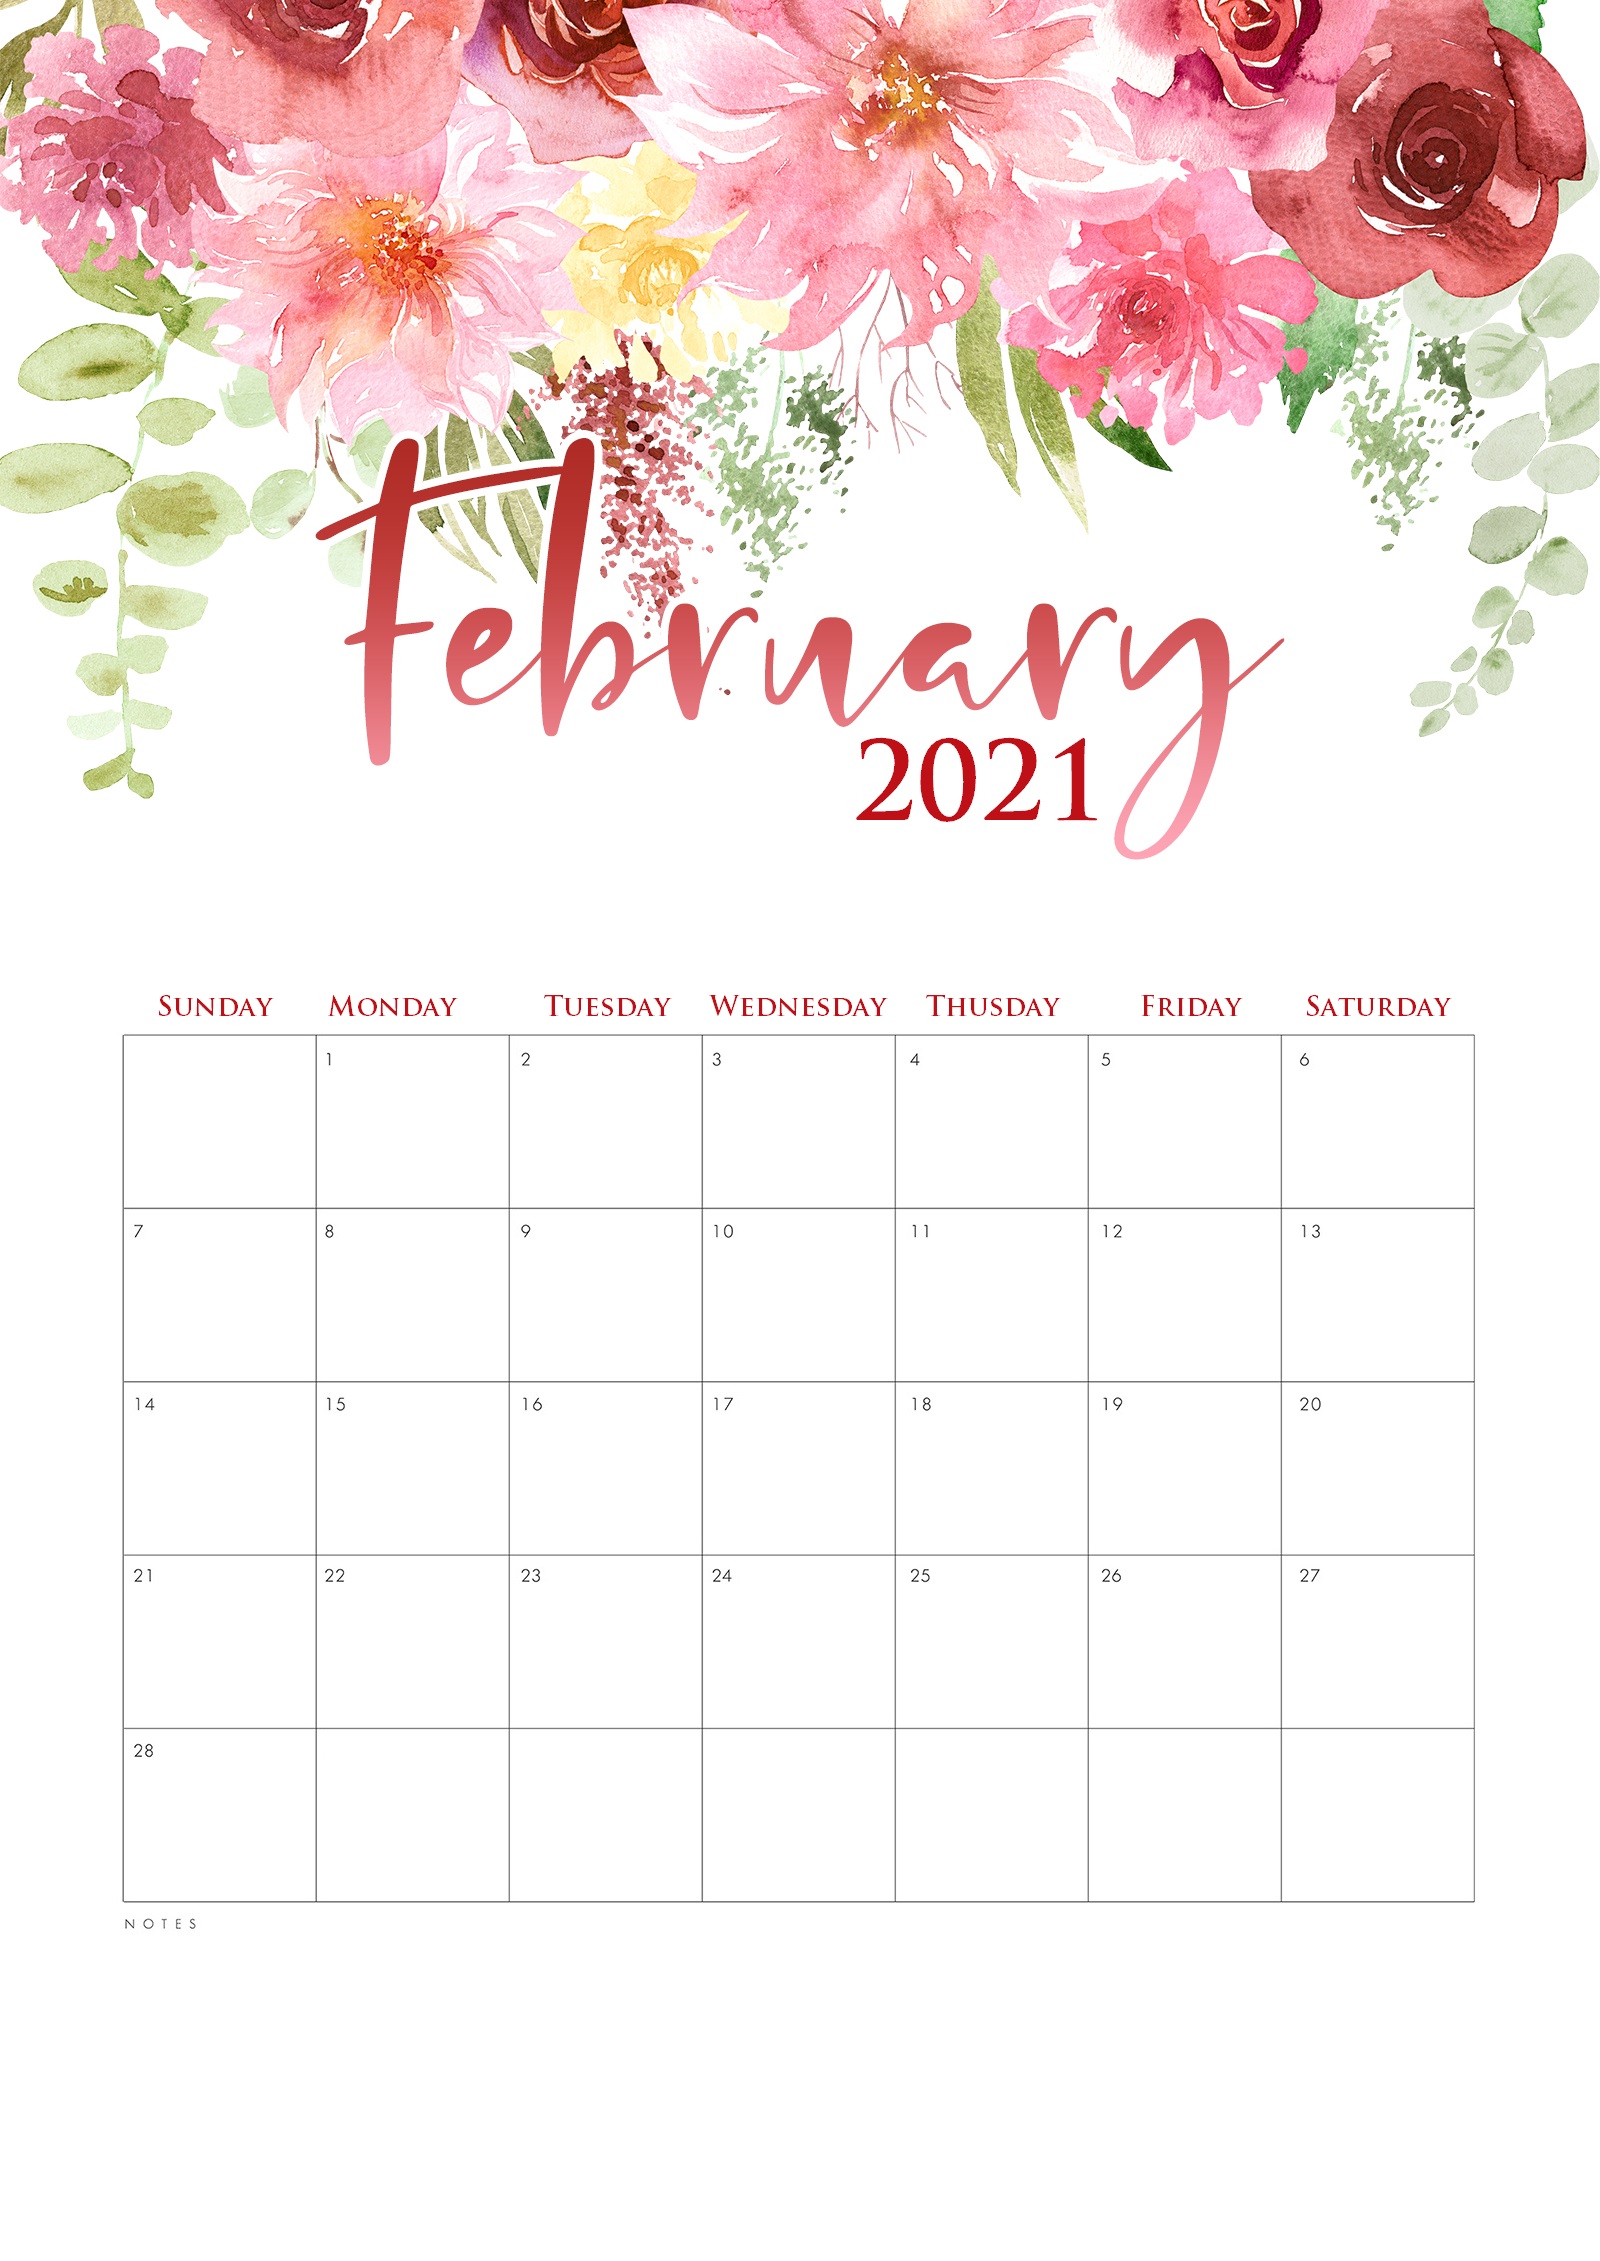 30 Free February 2021 Calendars For Home Or Office Onedesblog It is celebrated in many countries around the world. 30 free february 2021 calendars for